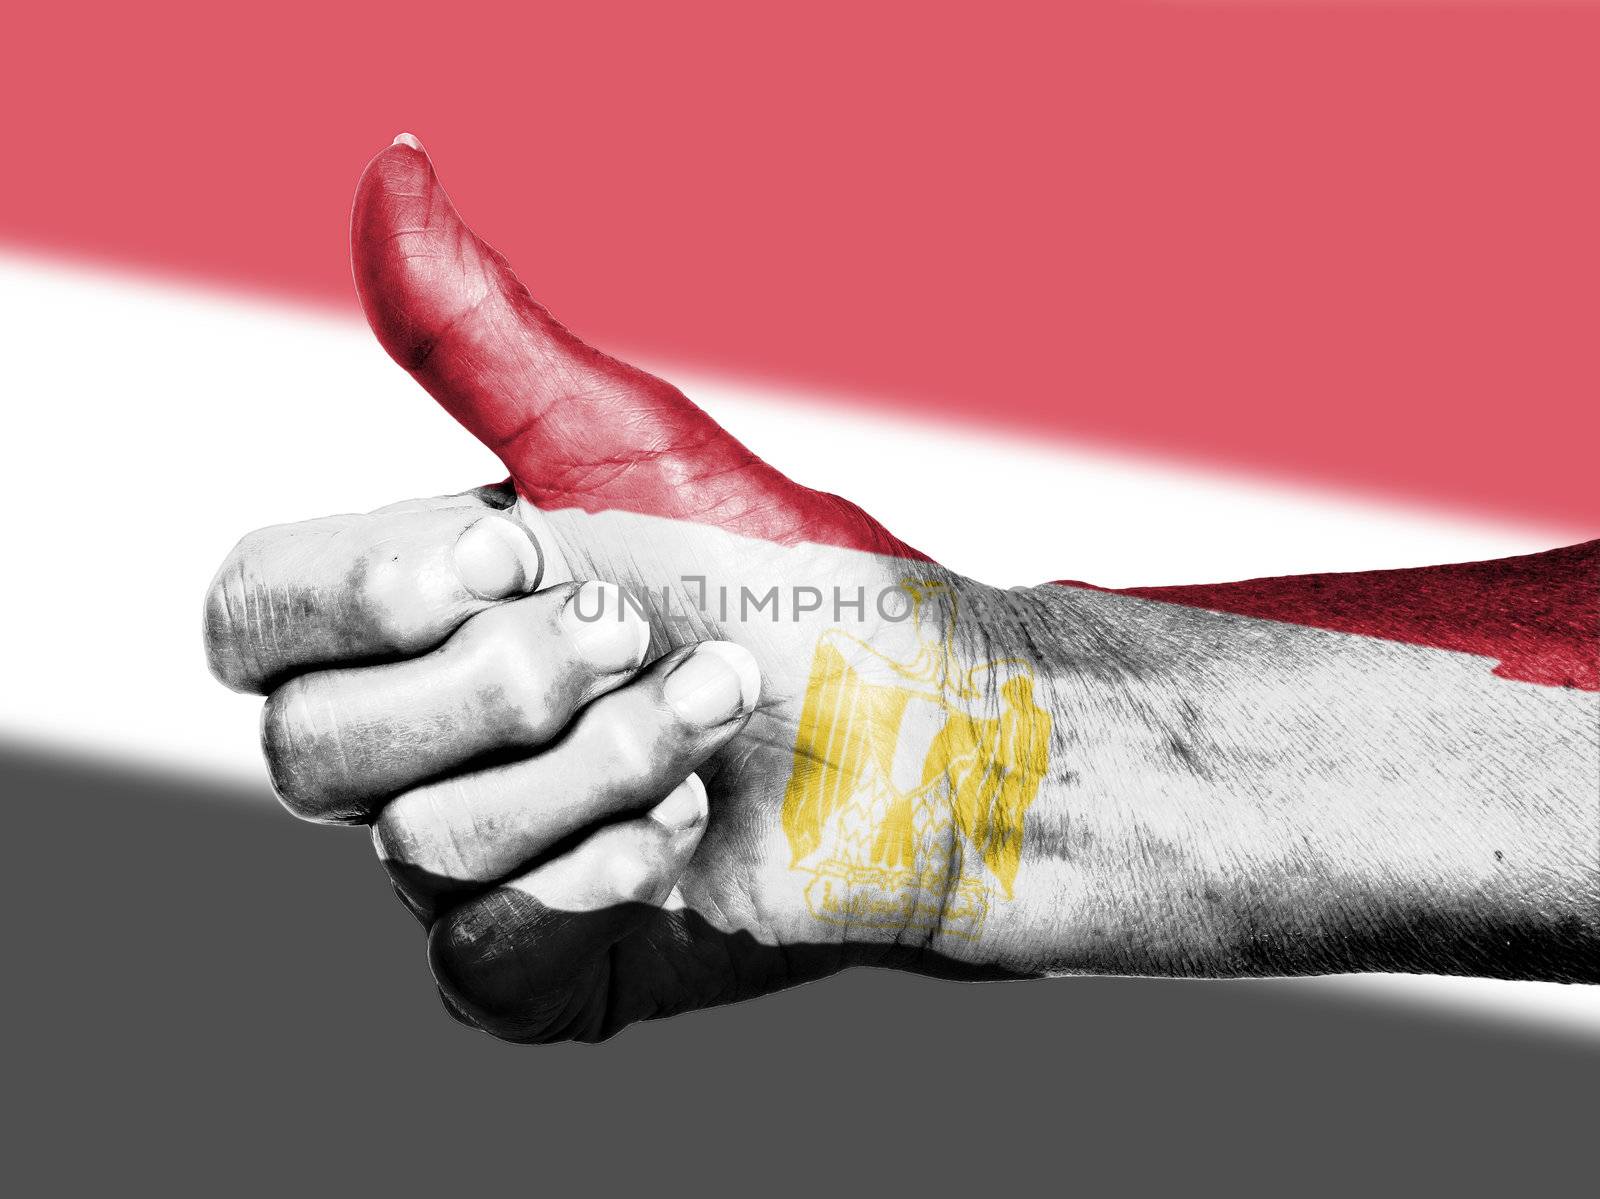 Old woman with arthritis giving the thumbs up sign, wrapped in flag pattern, Egypt